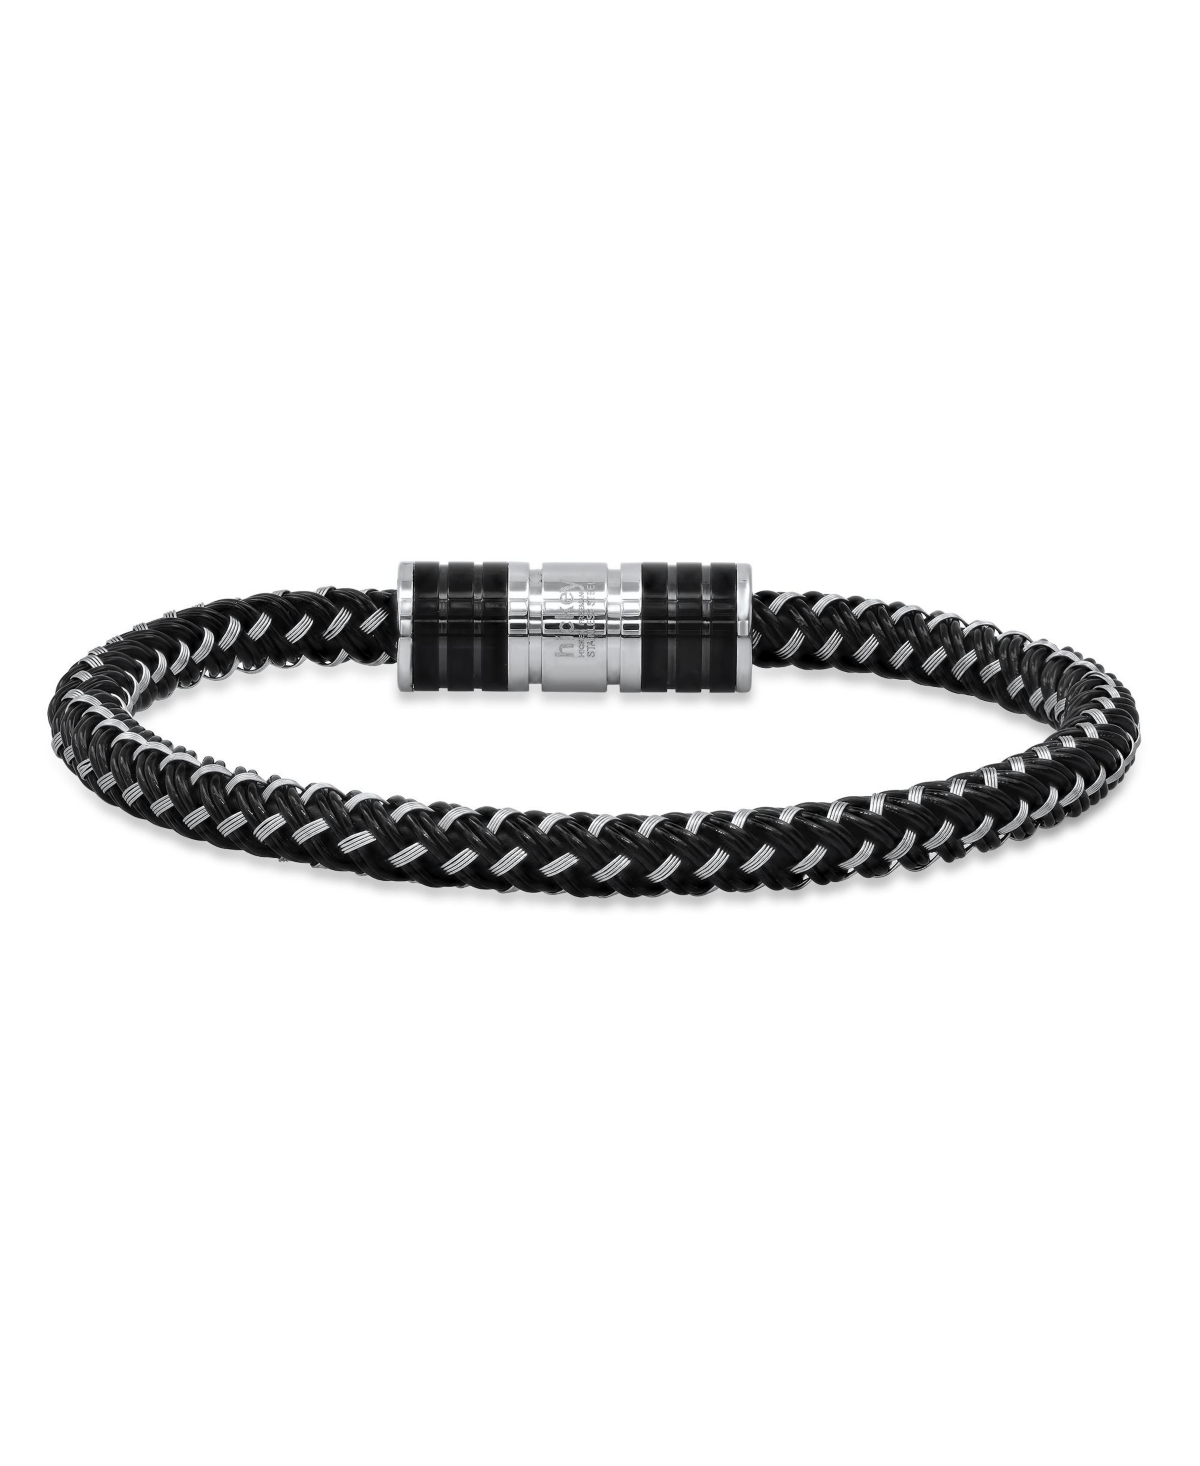 hickey by Hickey Freeman Carbon Fiber Two Tone Stainless Steel and Leather Cord Woven Braided Bracelet - Multi